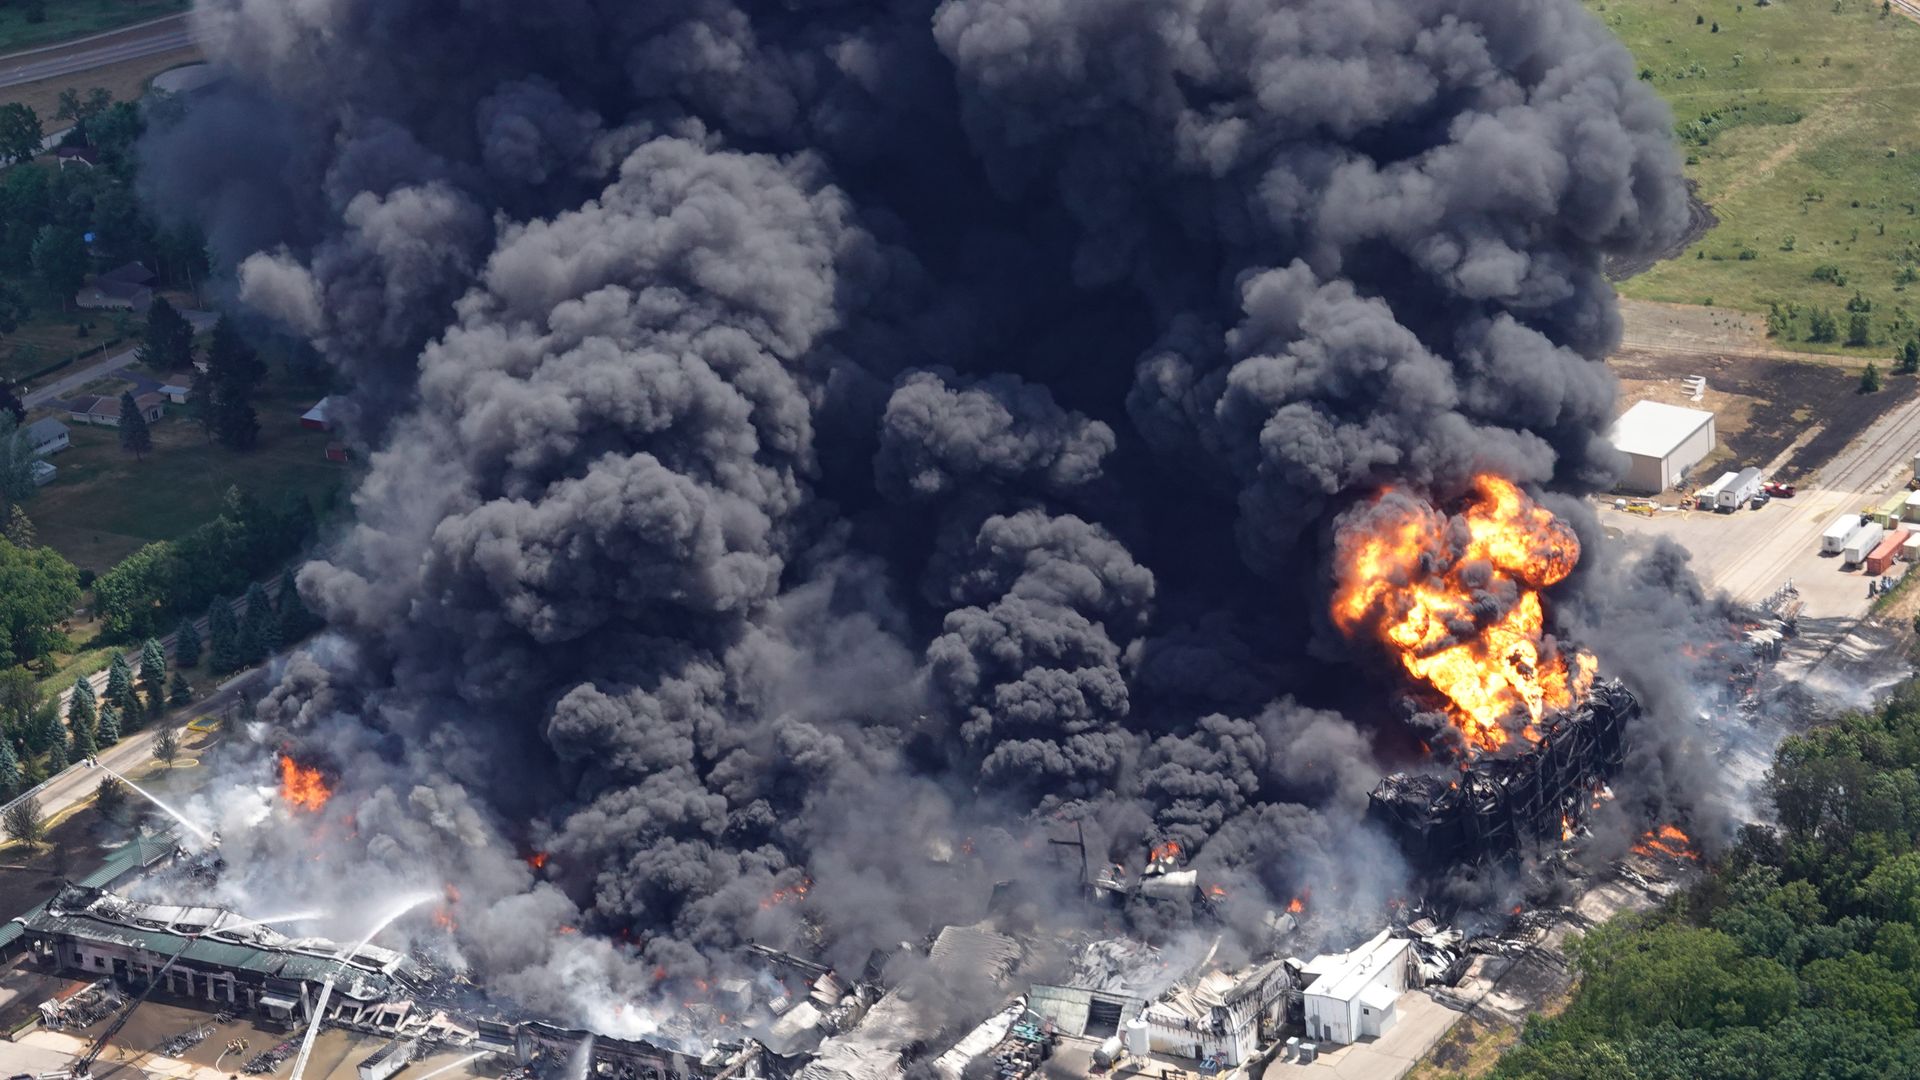 An industrial fire rages at Chemtool Inc. on June 14, 2021 in Rockton, Illinois